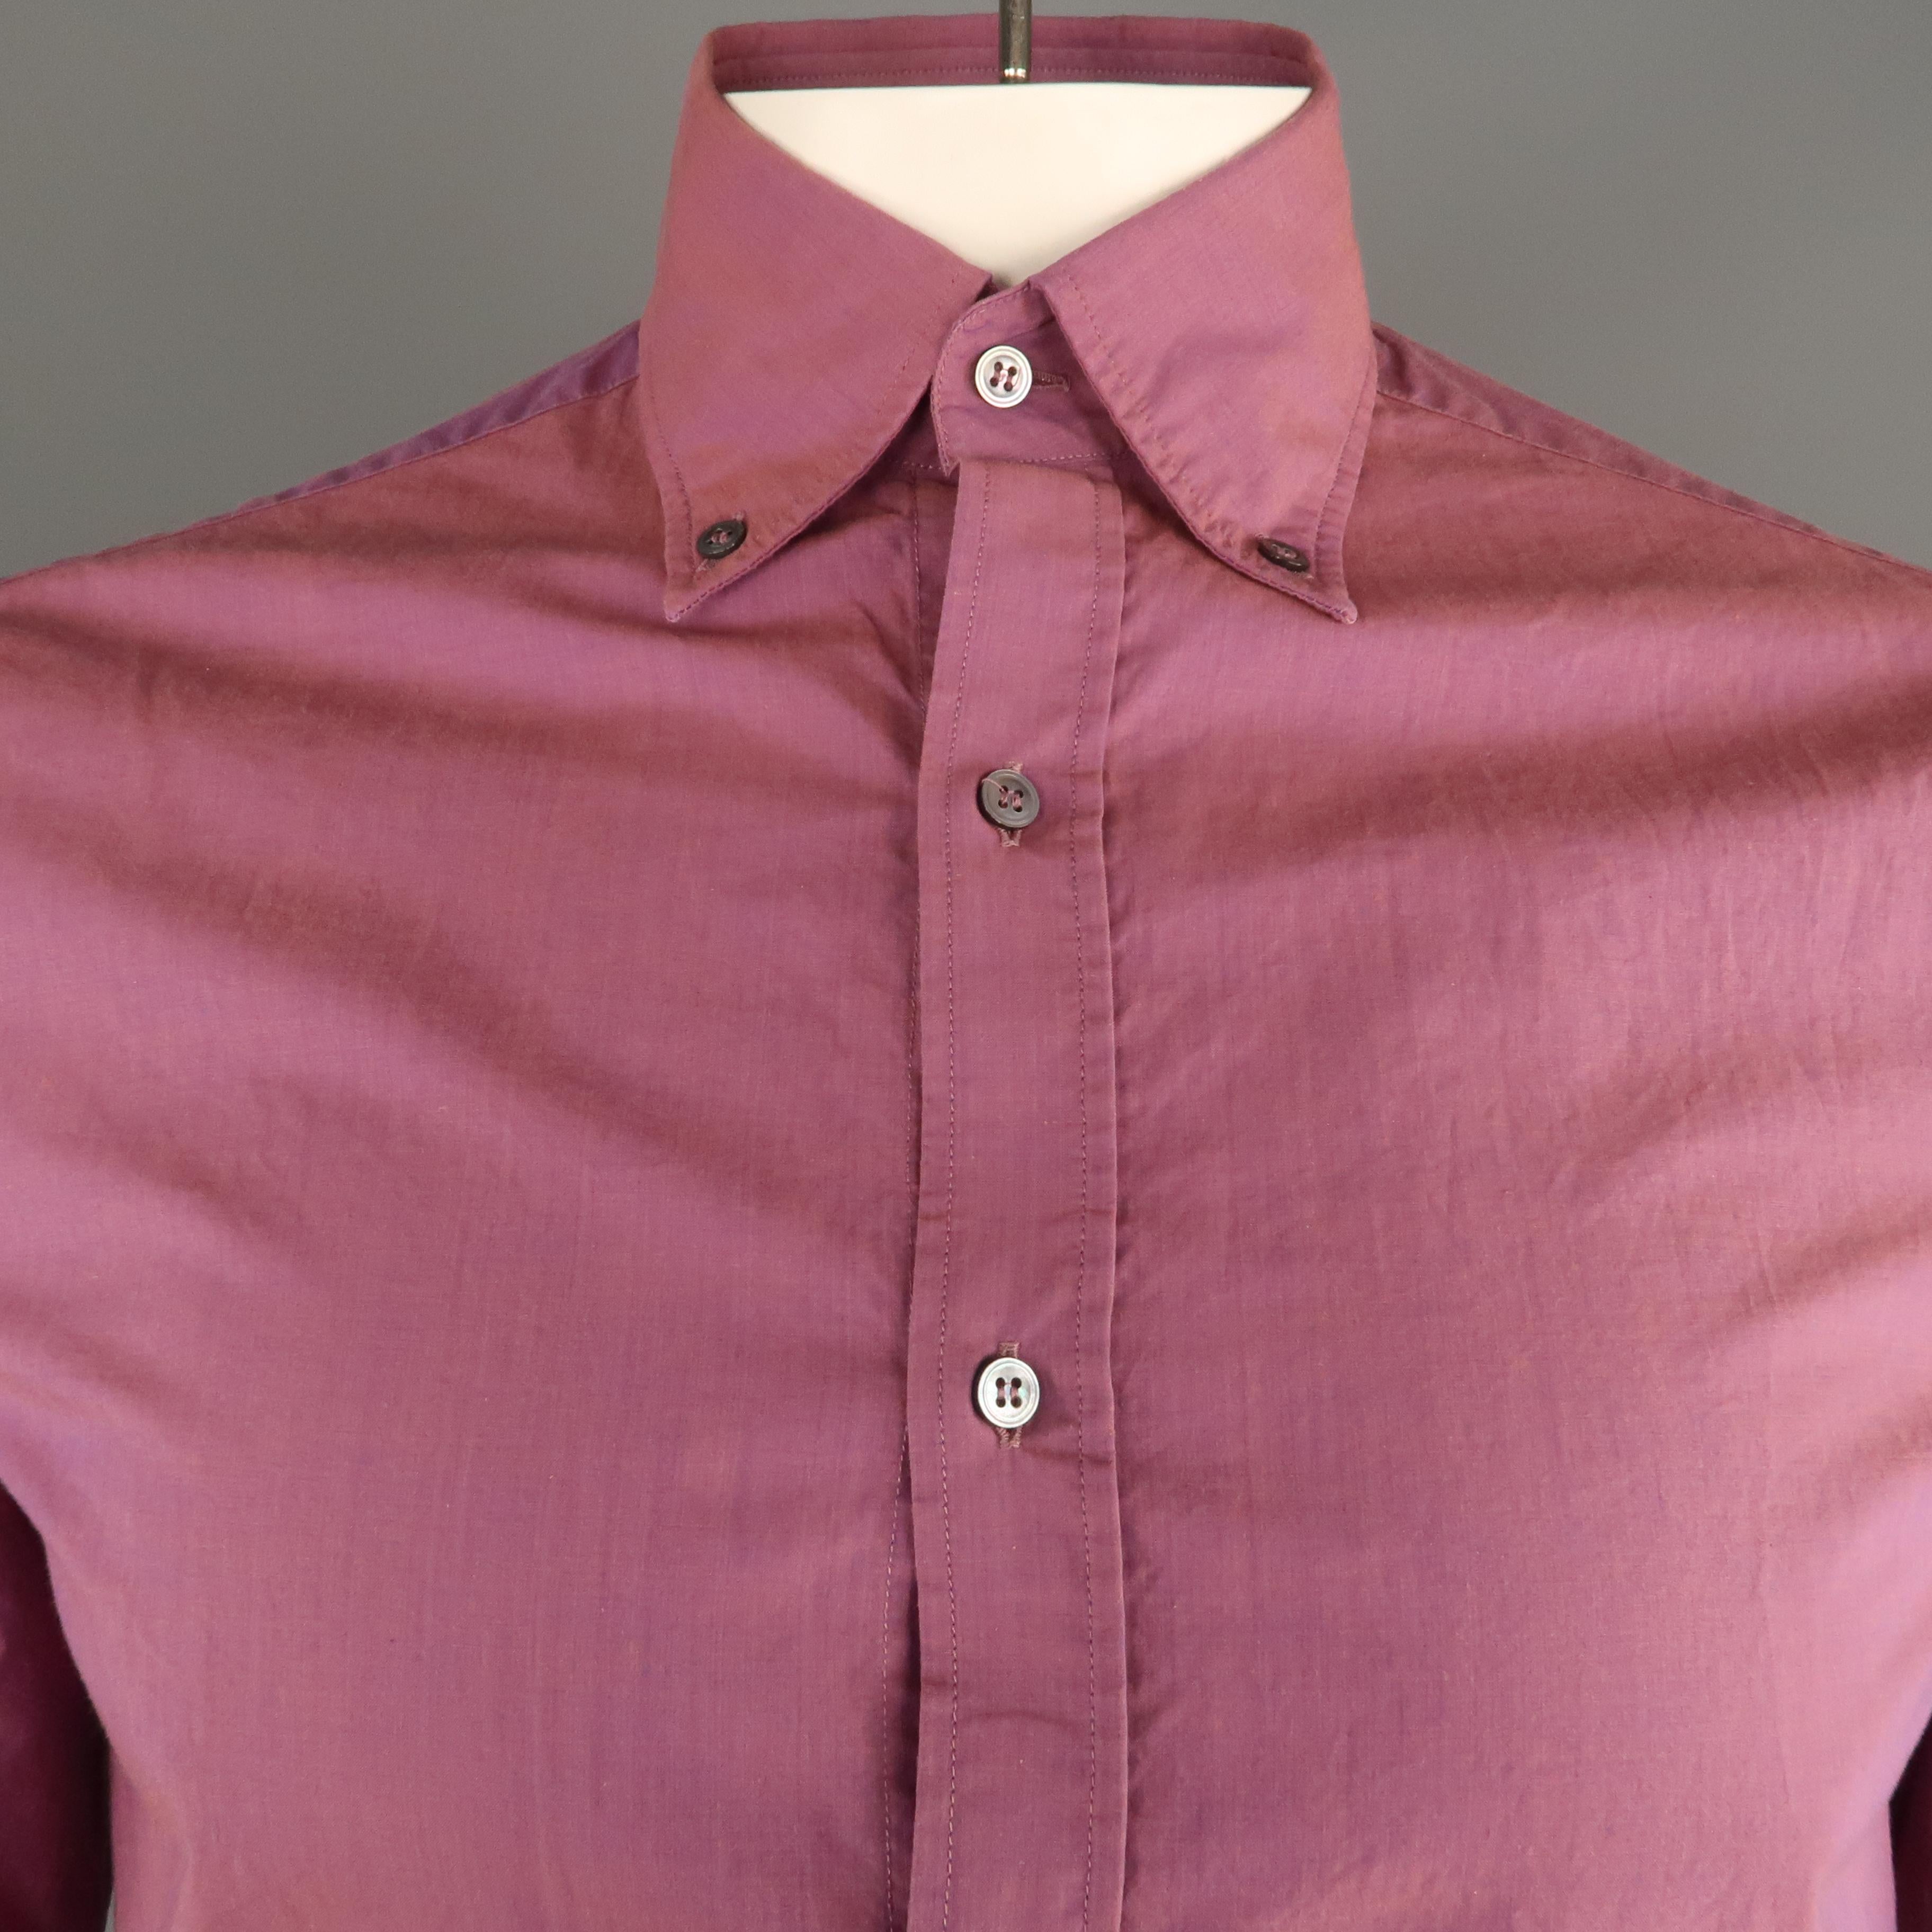 MICHAEL BASTIAN long sleeve shirt comes in a magenta cotton featuring a button-down collar. Comes with tag. Made in Italy.
 
Very Good Pre-Owned Condition.
Marked: 39/15.5
 
Measurements:
 
Shoulder:  18.5 in.
Chest: 42 in.
Sleeve: 26.5 in.
Length: